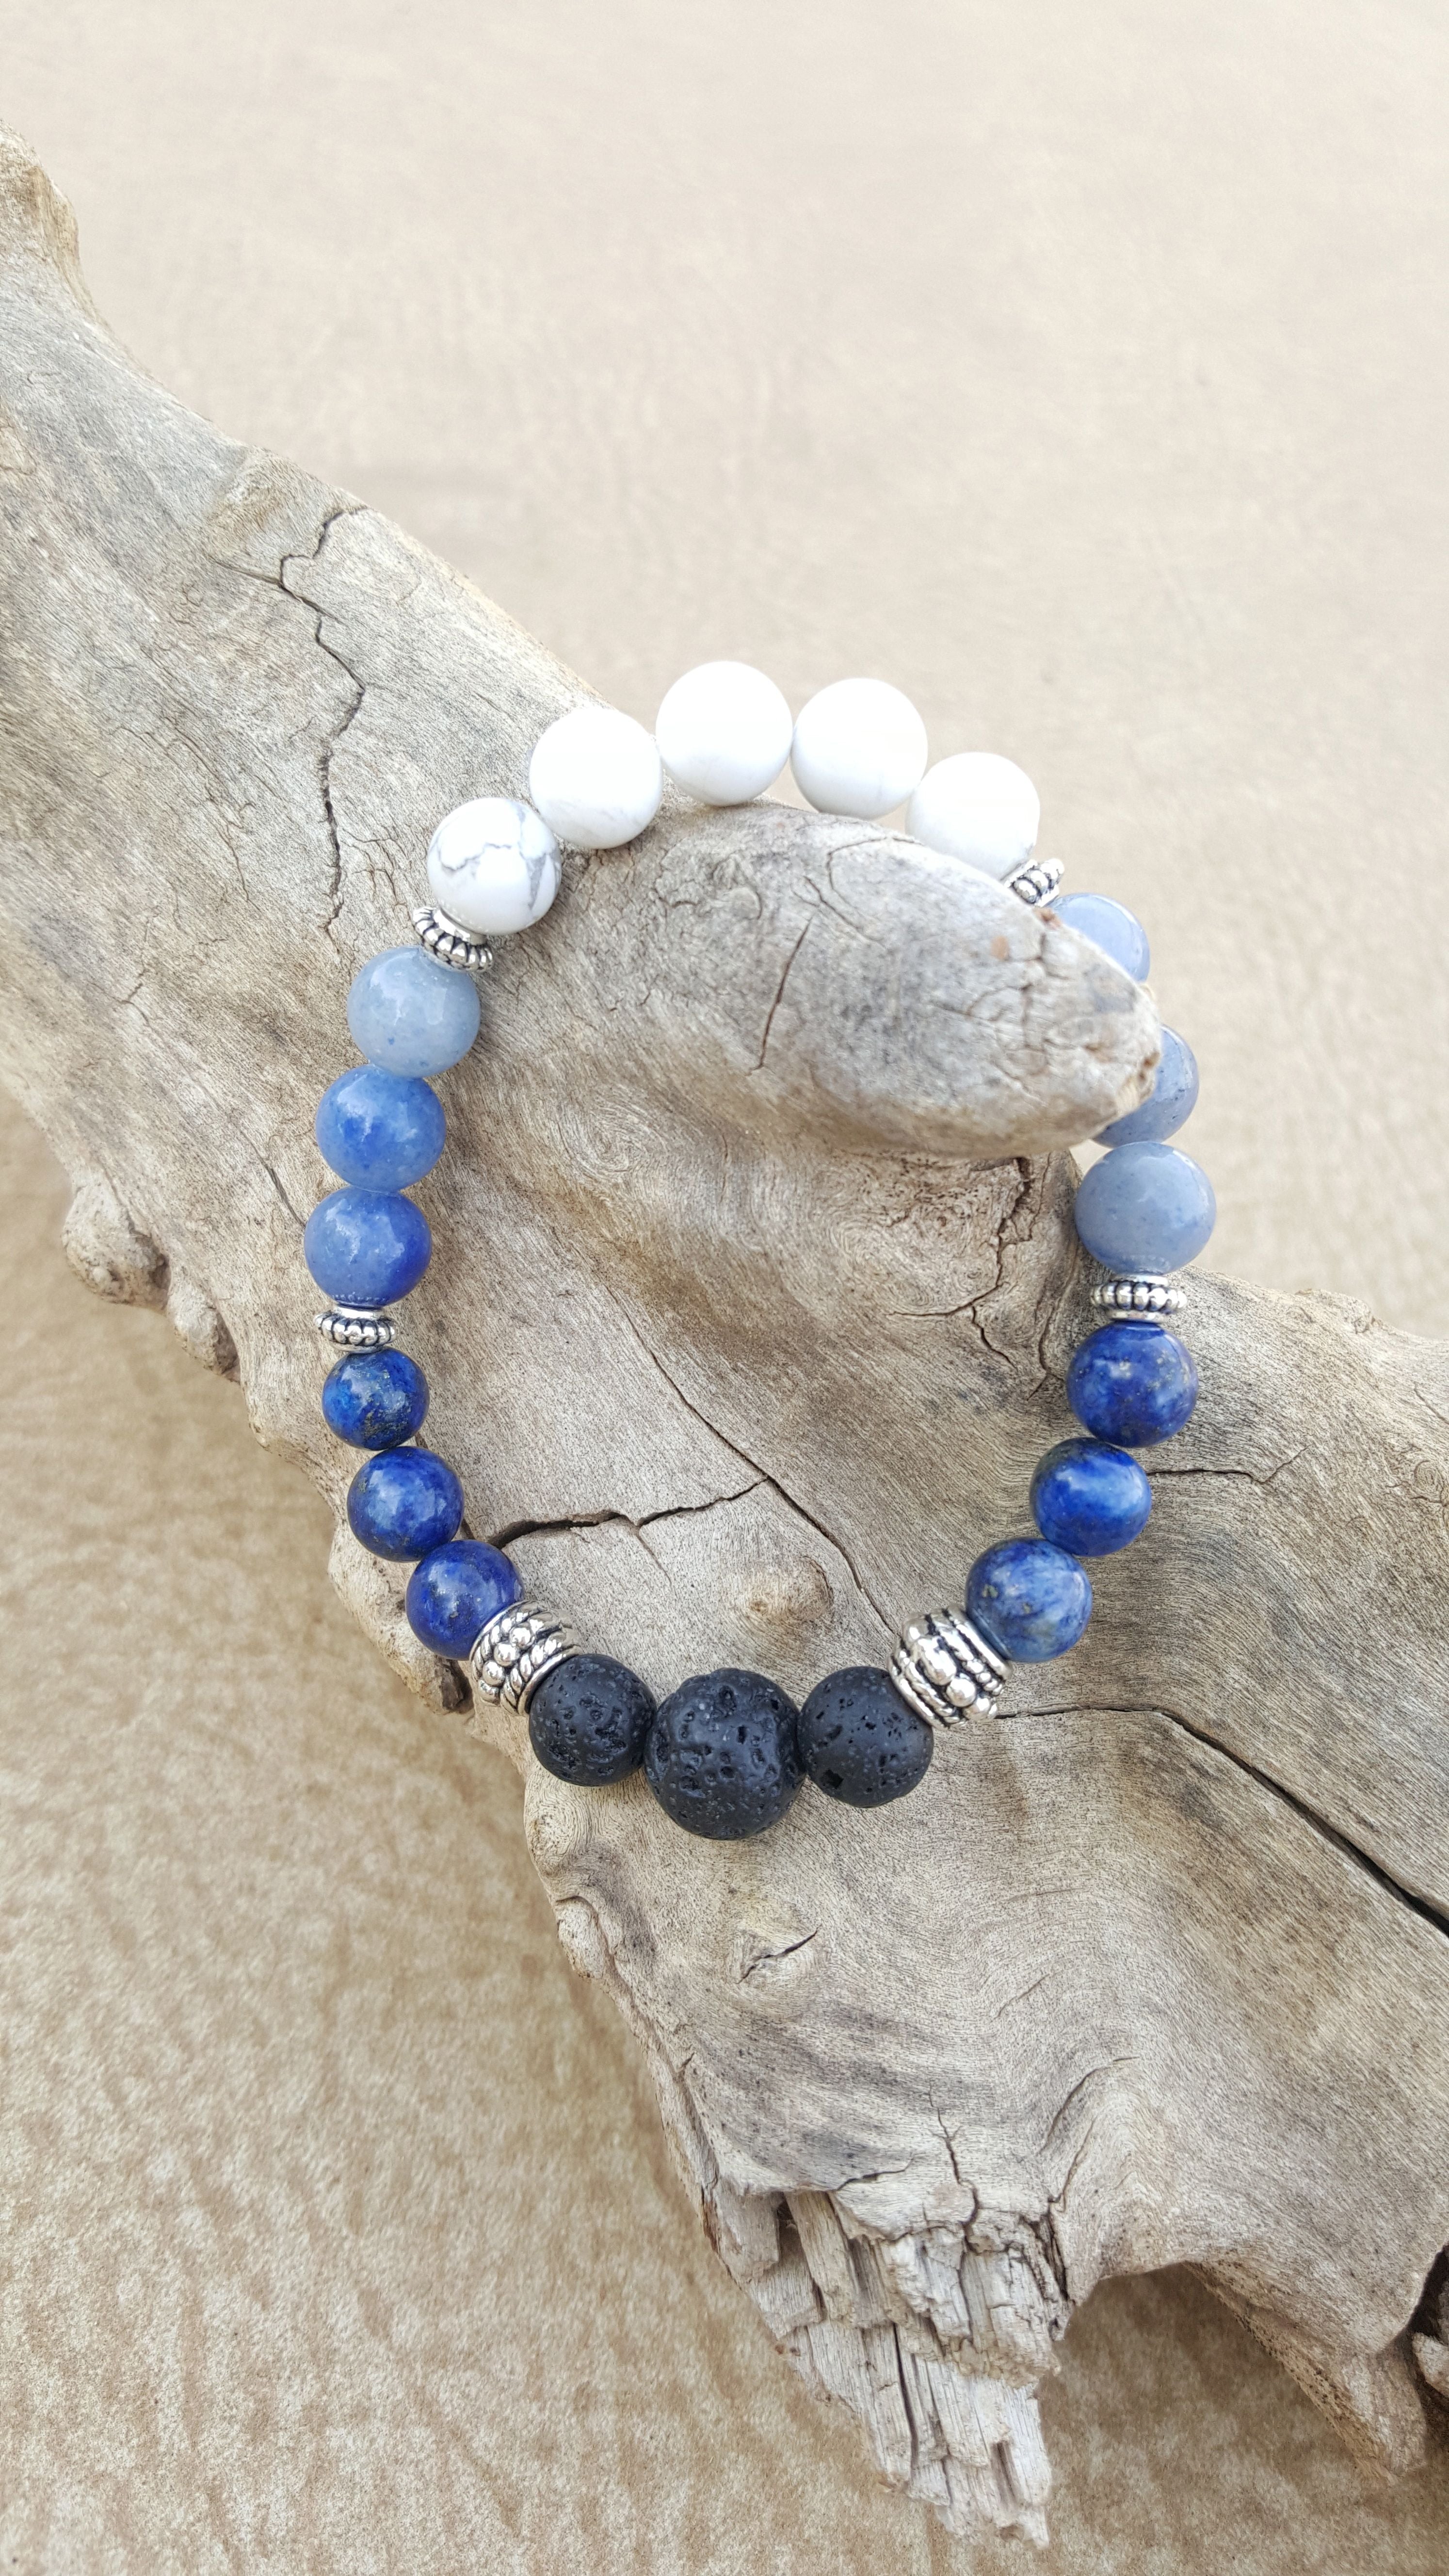 Buy Silver Stainless Steel with Blue Tiger's Eye & Black Molten Lava Bead  Expandable Bracelet Online - Inox Jewelry India